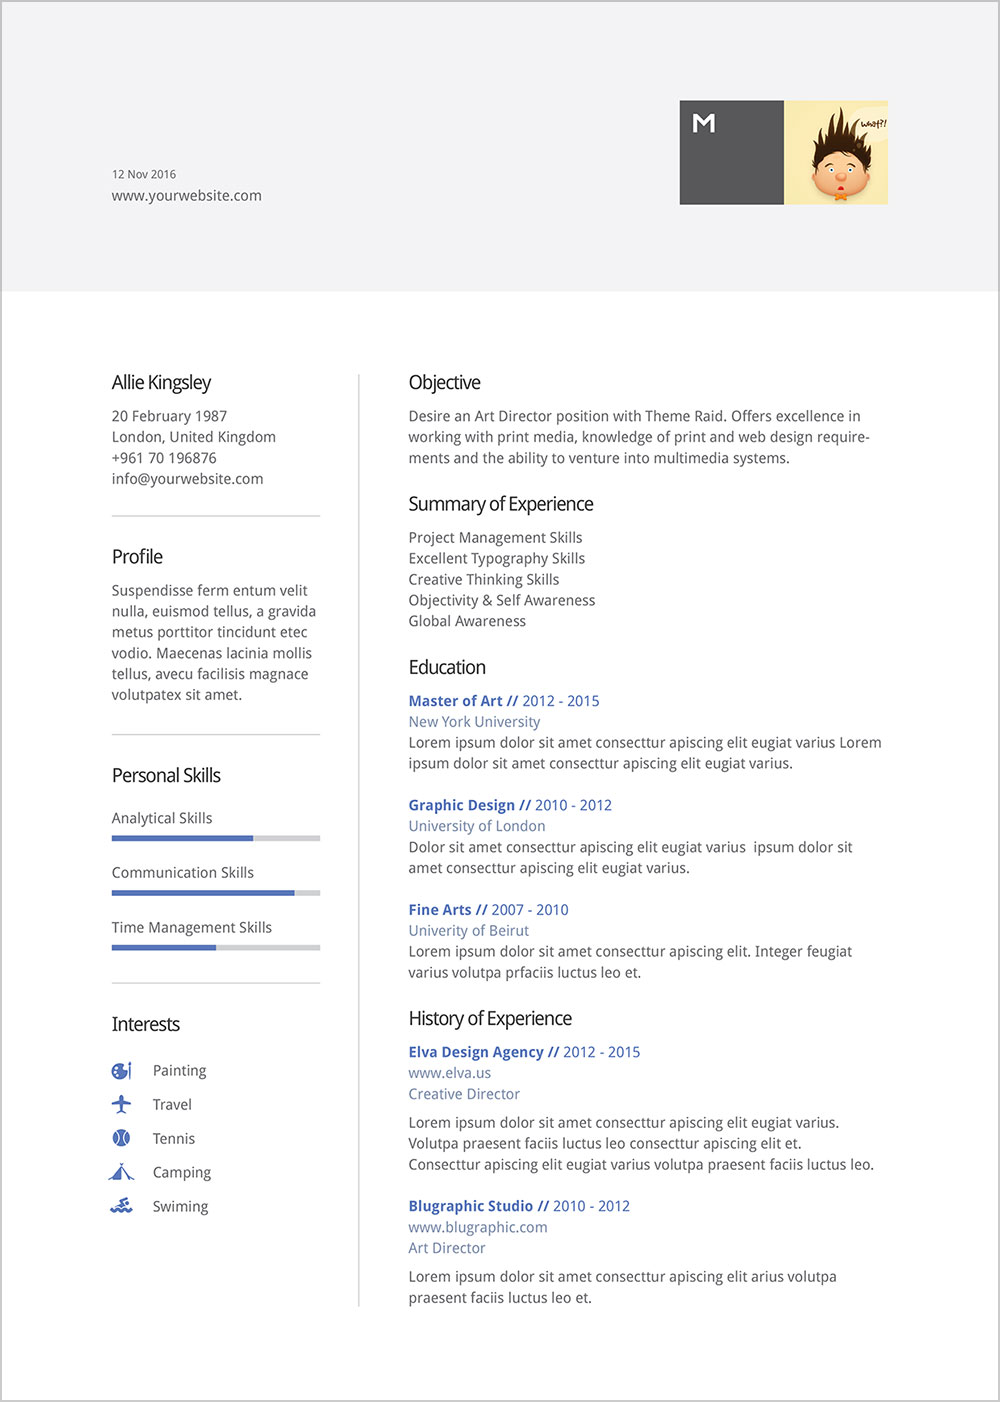 Free Ai DOC & DOCX Professional Resume Template for Architects & Designers (4)